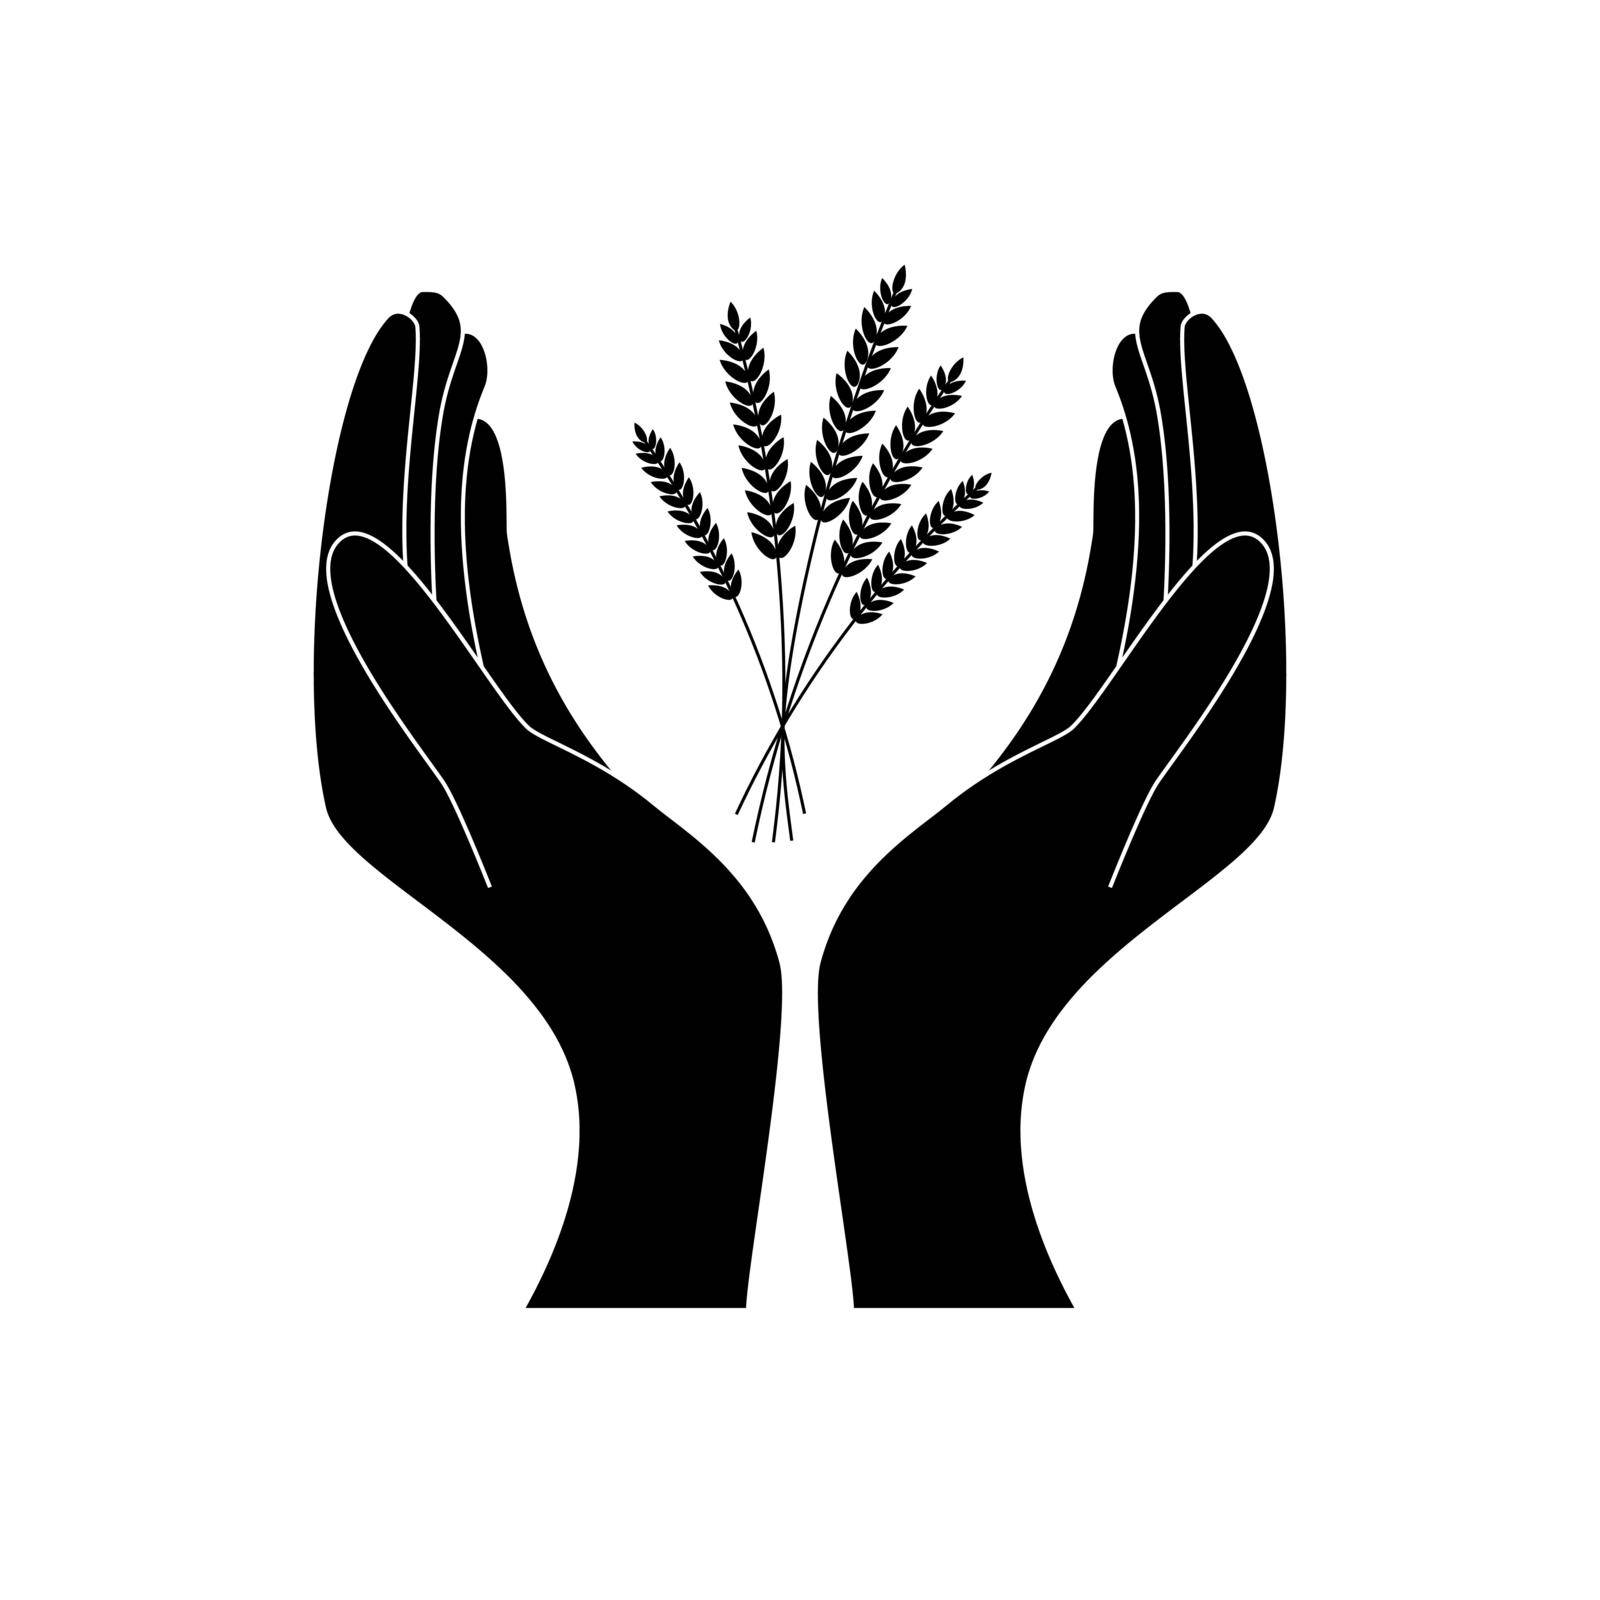 Man holding in hand wheat ear, black icon isolated on white background. Wheat spike holding farmer, peasant. Development agriculture, farming. Symbol of harvest. Vector illustration silhouette design.